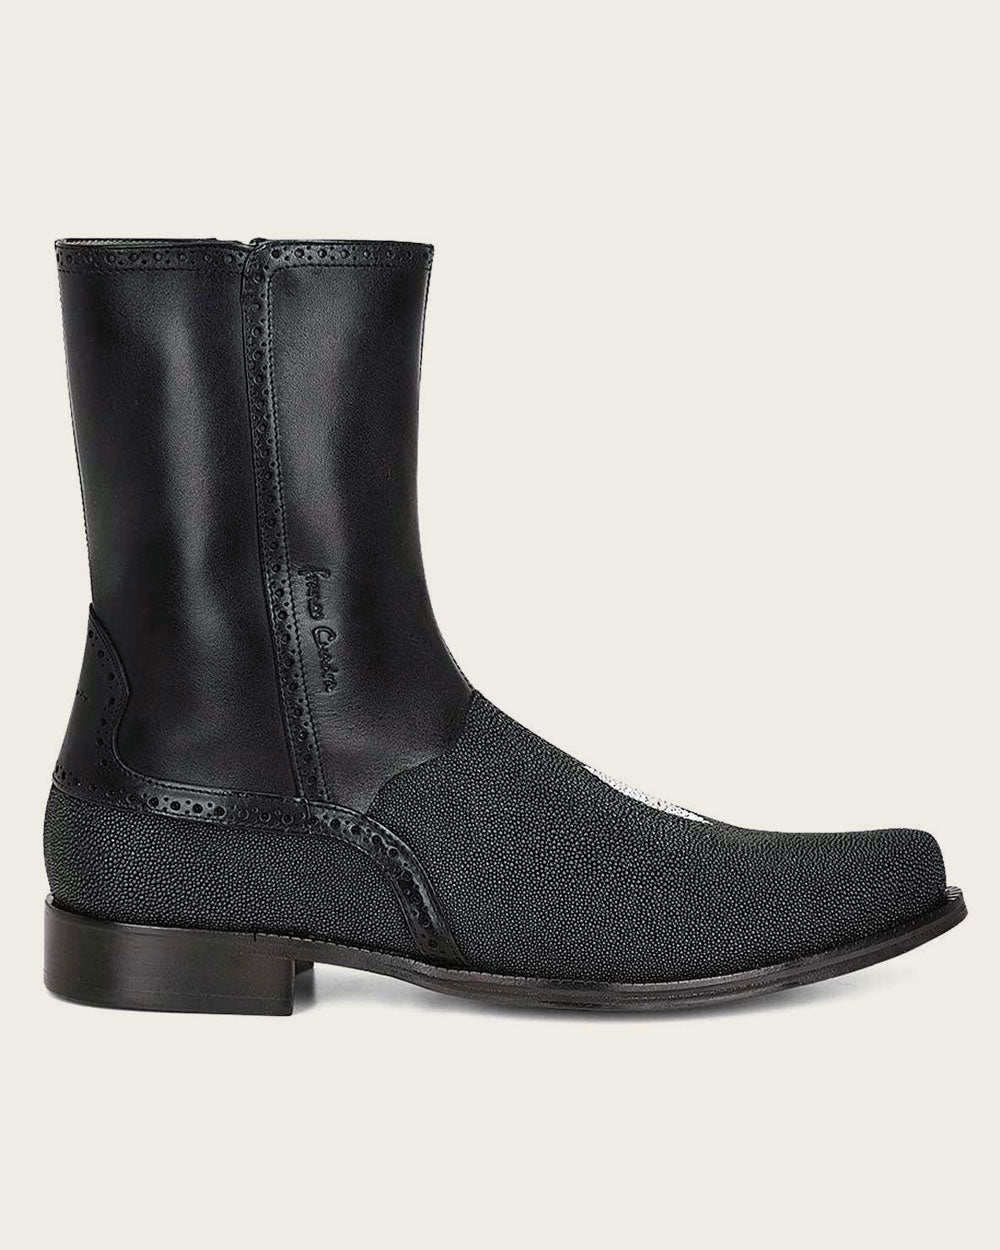 Elevate your style: Black stingray leather boots by Cuadra. 